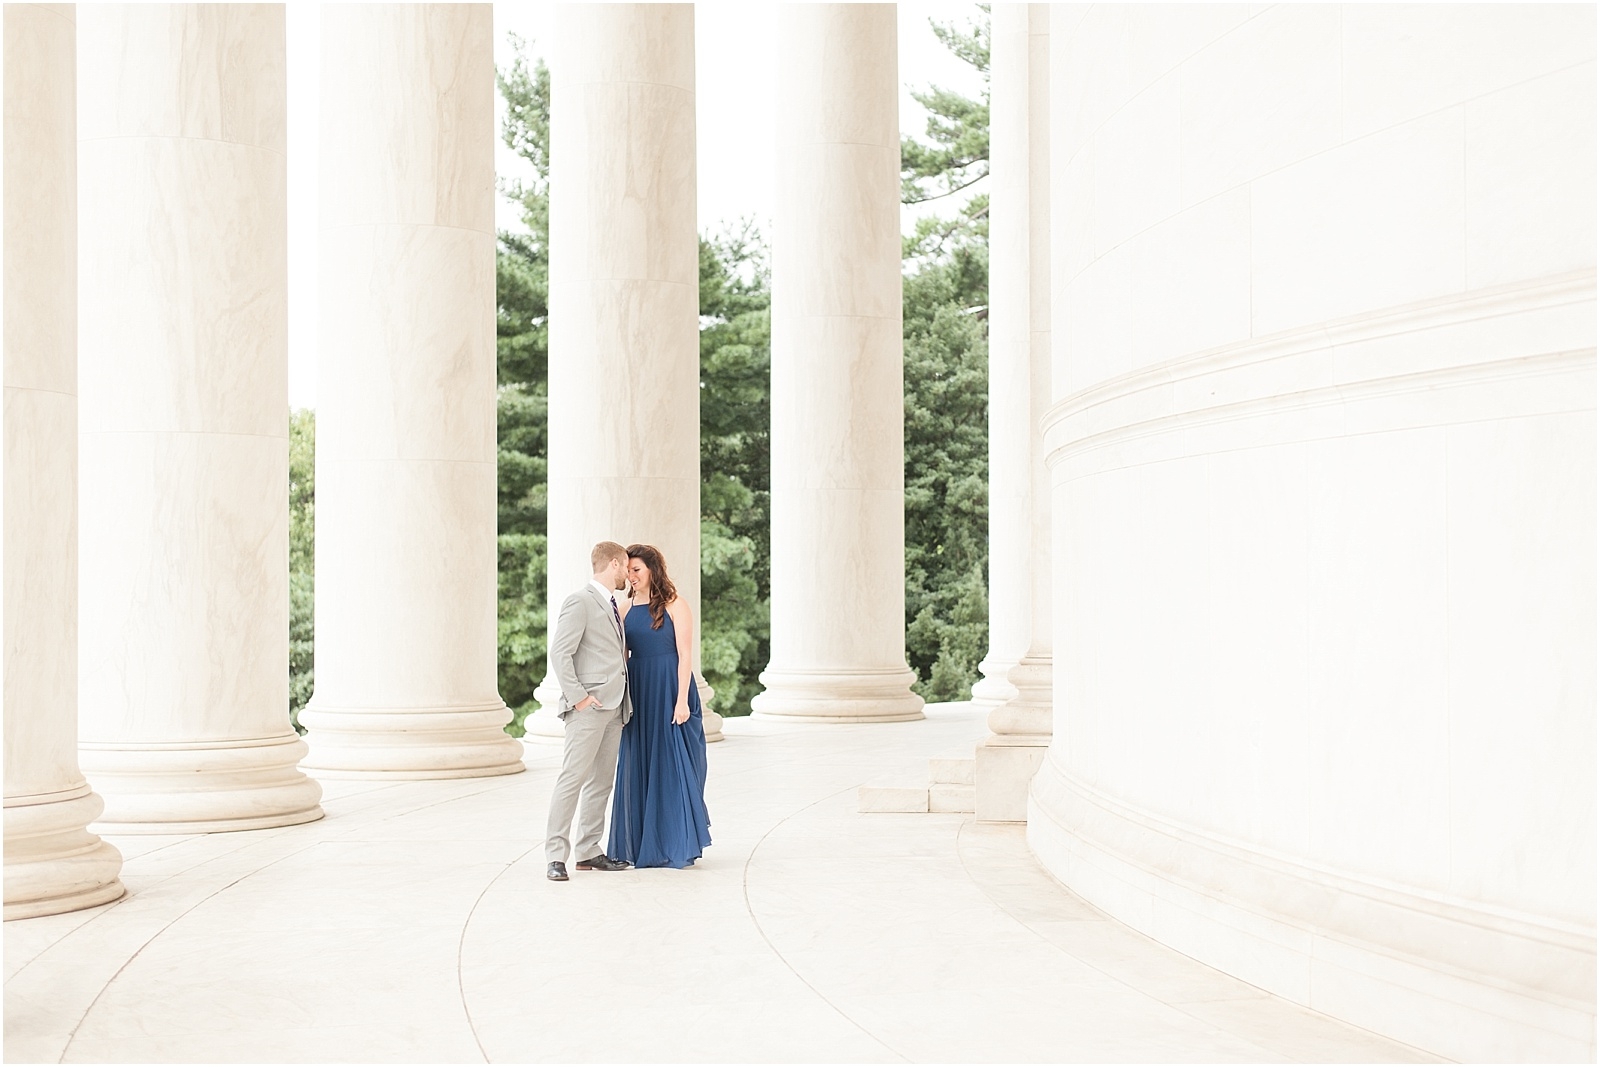 0019 Bret and Brandie Photography| Washington DC Engagement | Megan and Connor.jpg